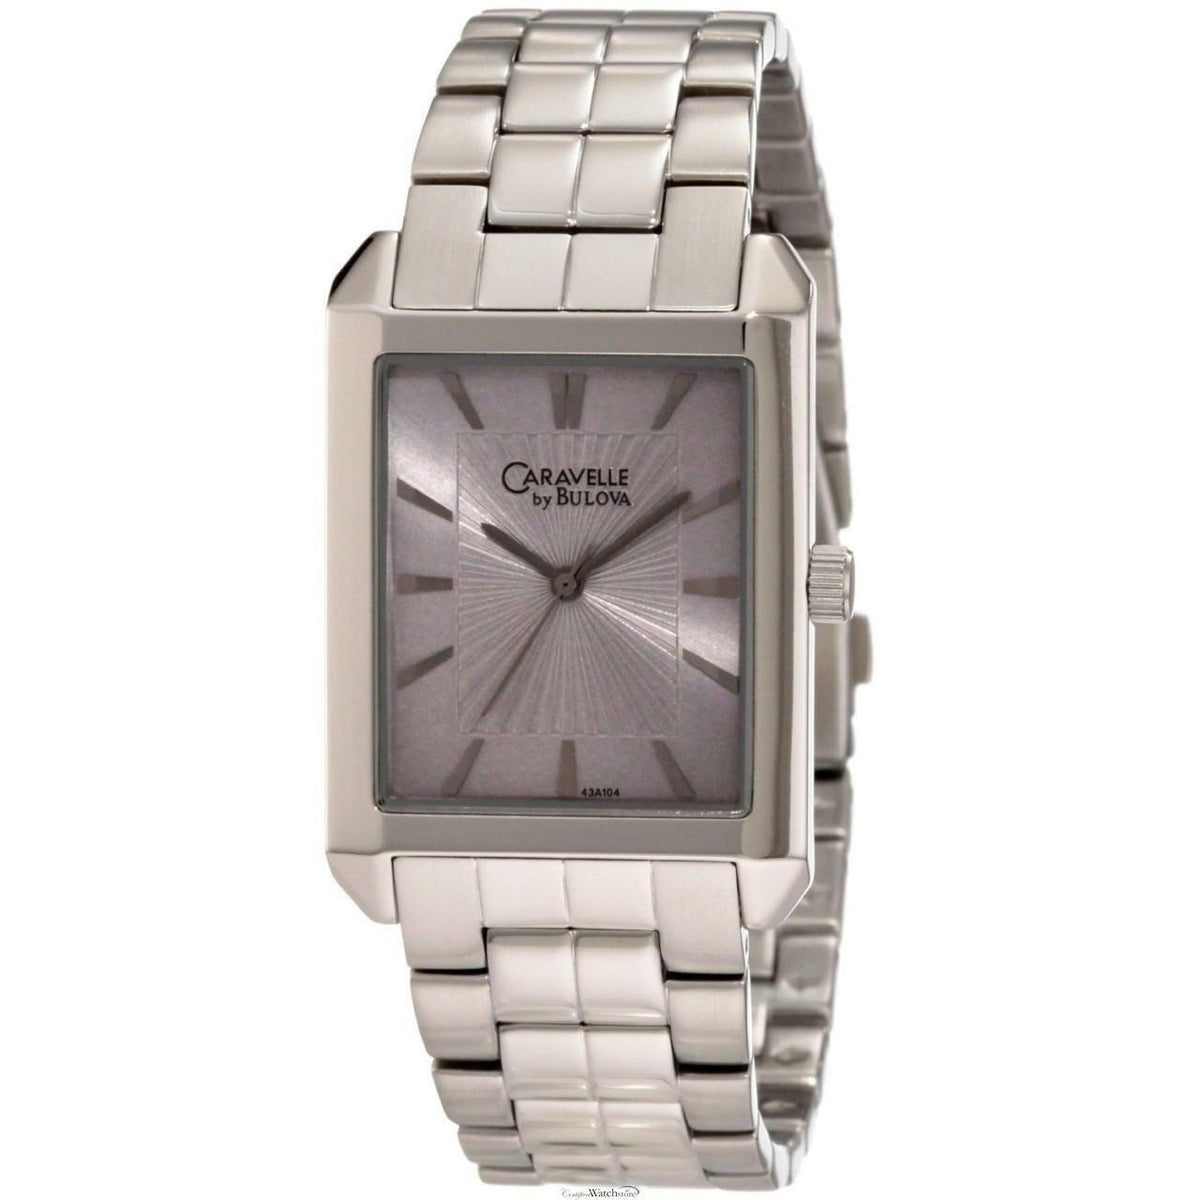 Bulova Men&#39;s 43A104 Caravelle Stainless Steel Watch